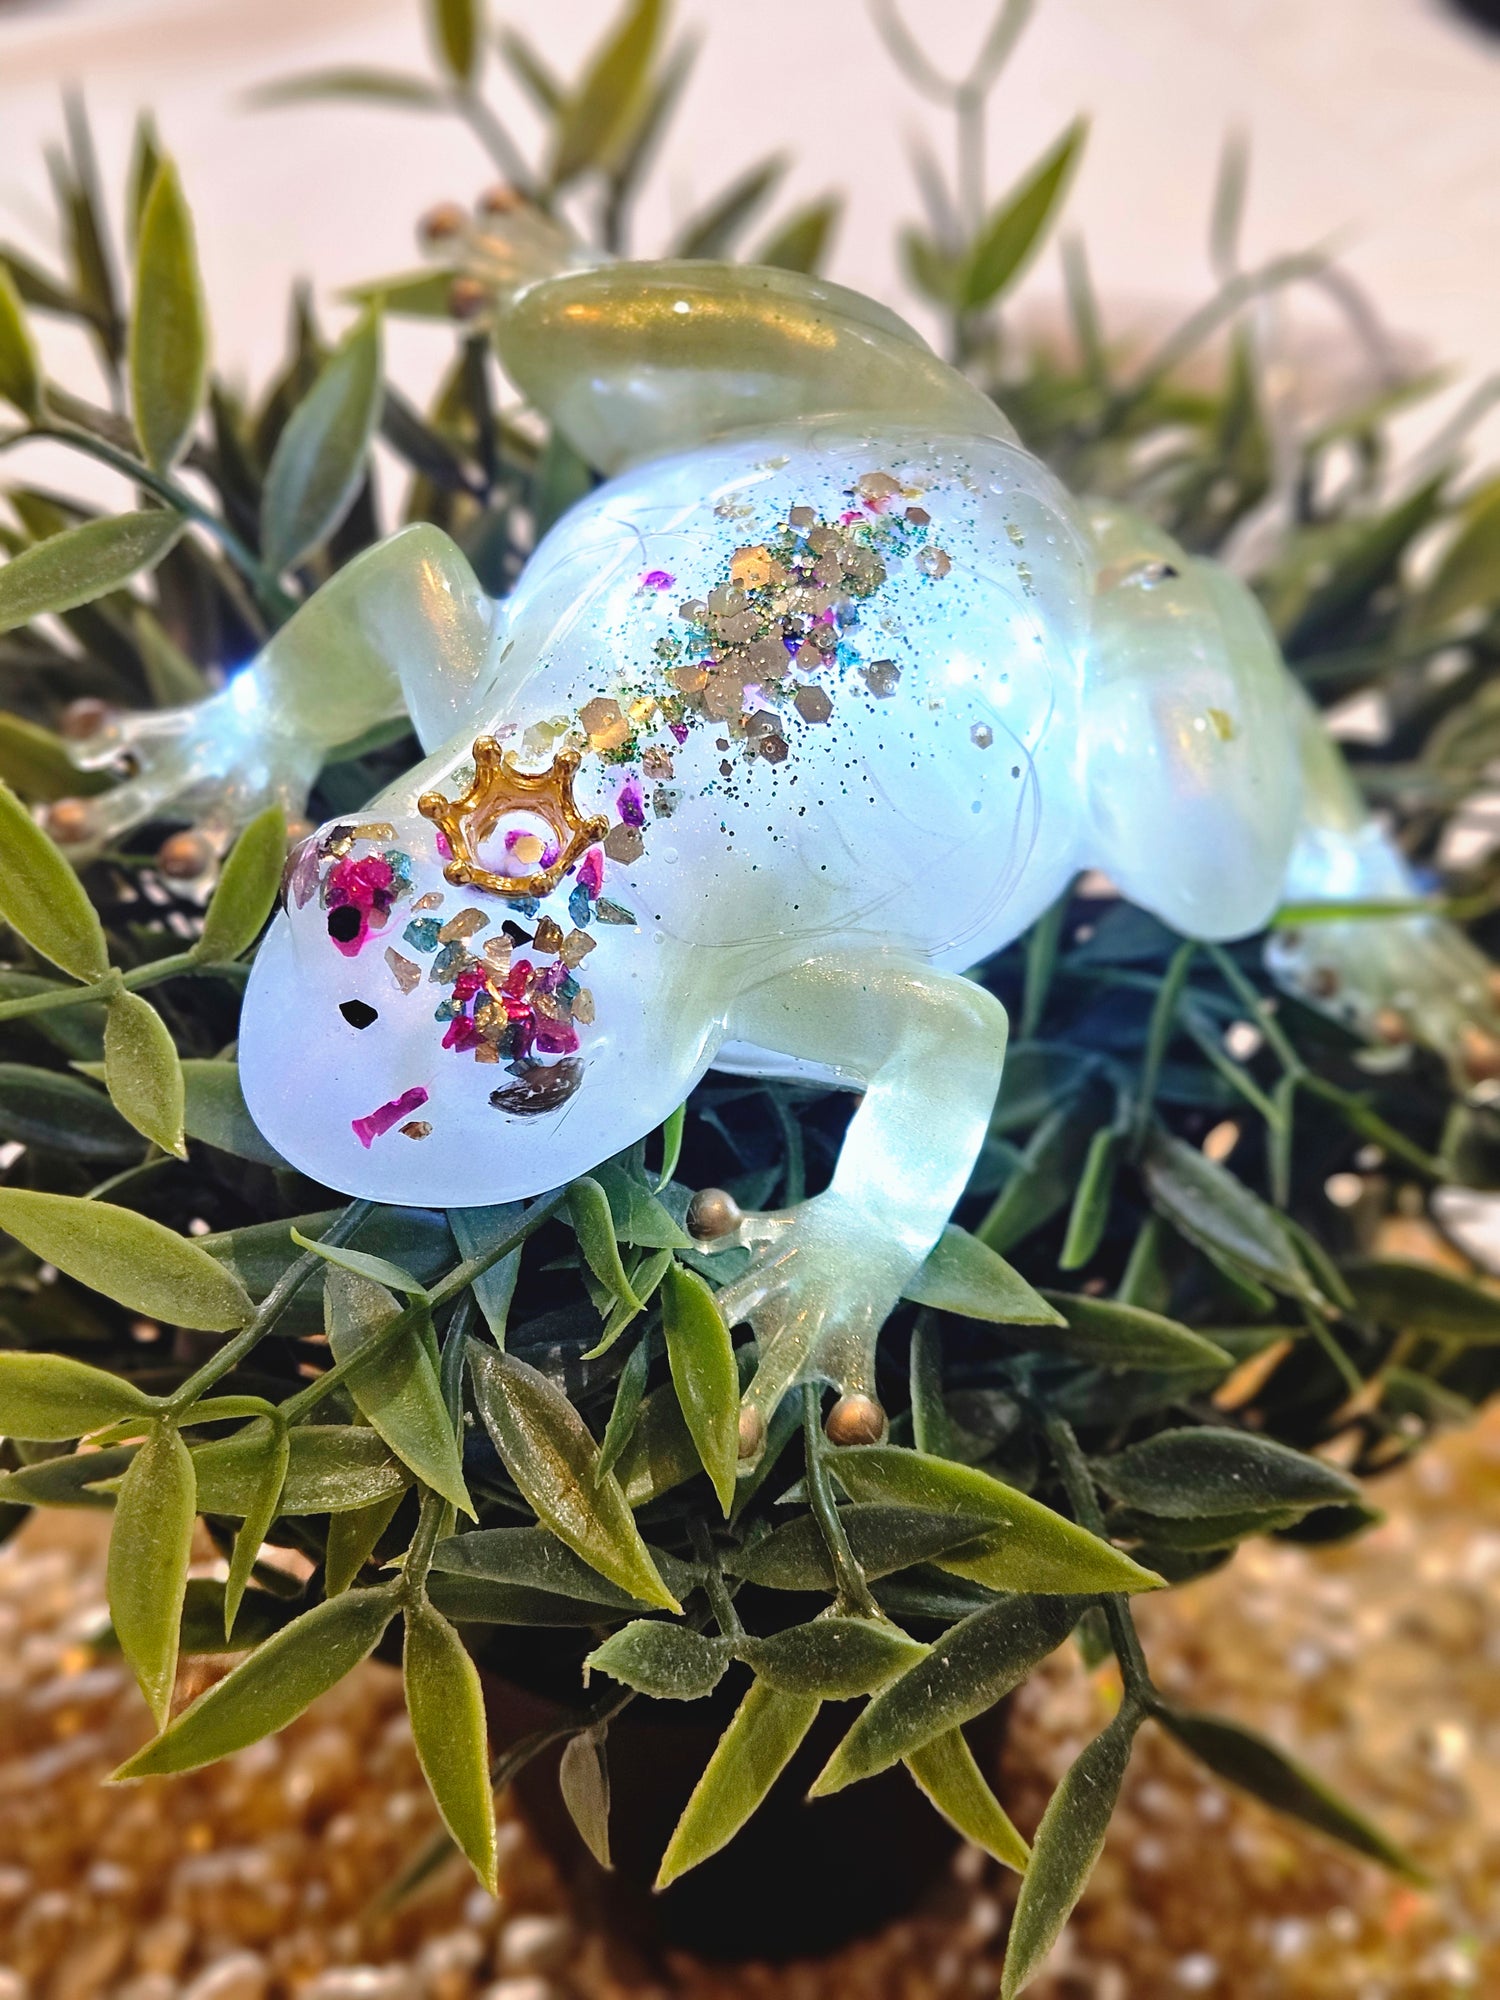 Resin 'Light up" Frog in Gold, Green and Pearl with lights and glow-in-the-dark glitter